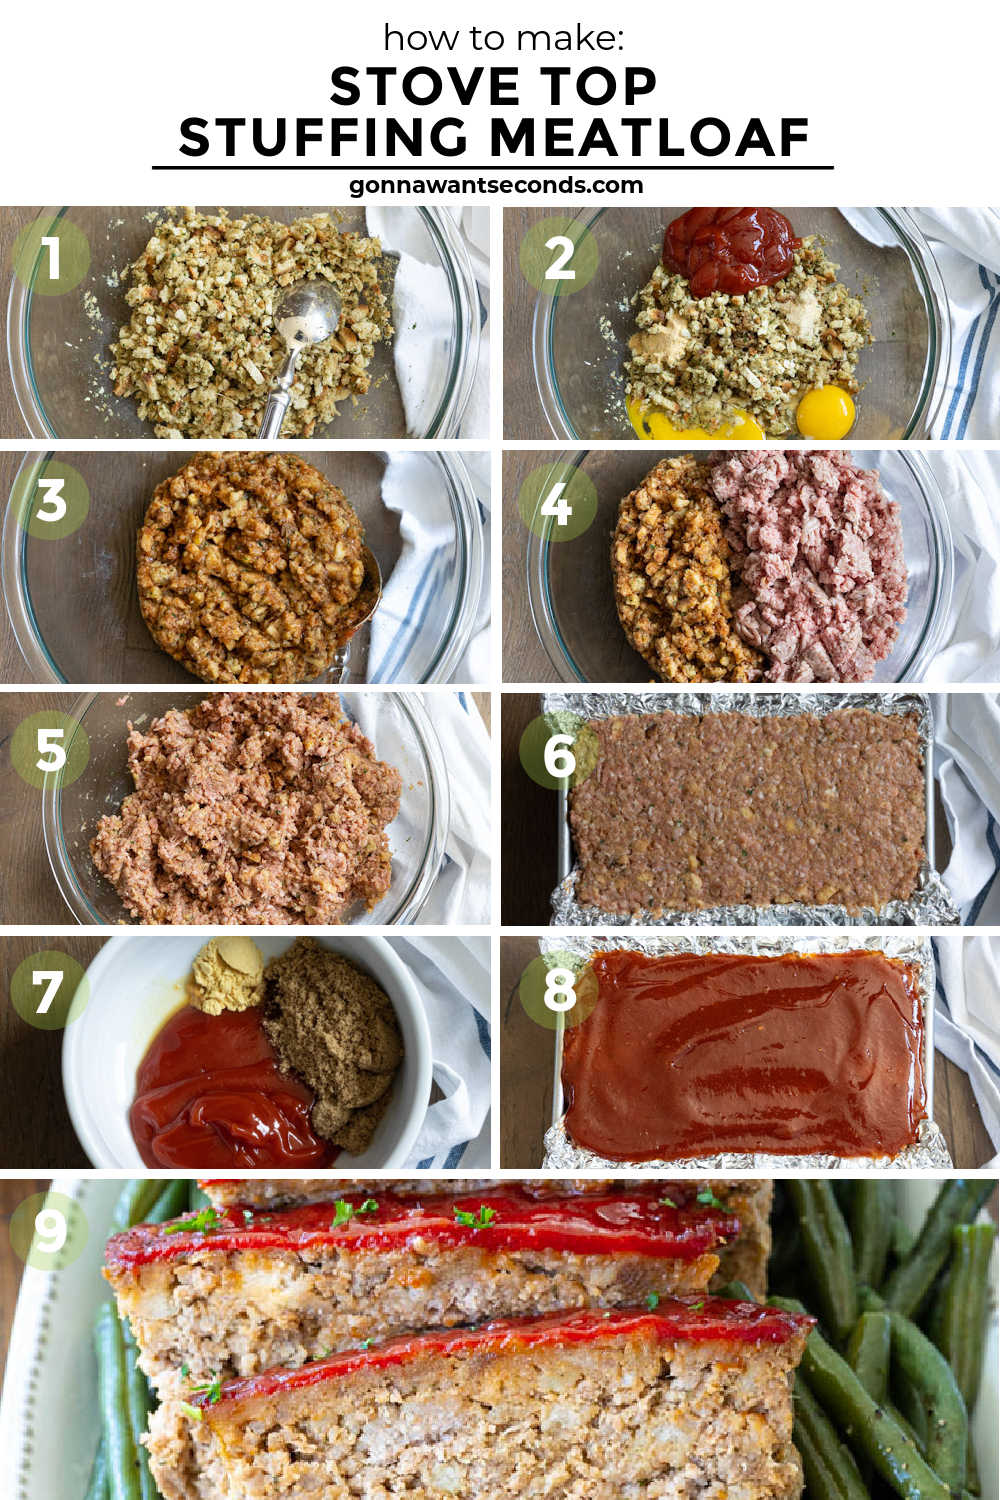 step by step how to make stove top stuffing meatloaf